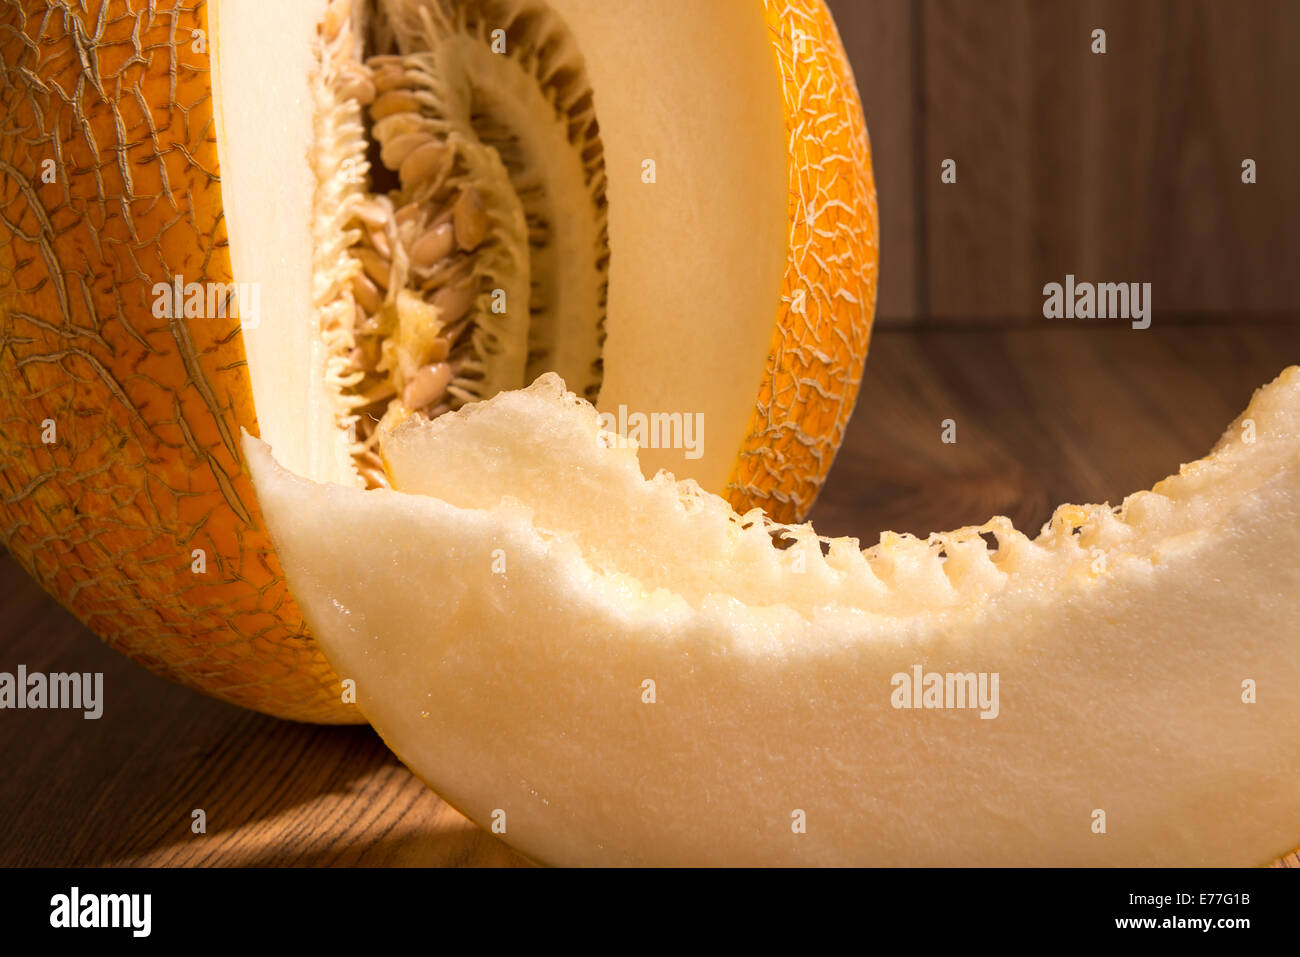 yellow netted melon - the fruit and slices Stock Photo